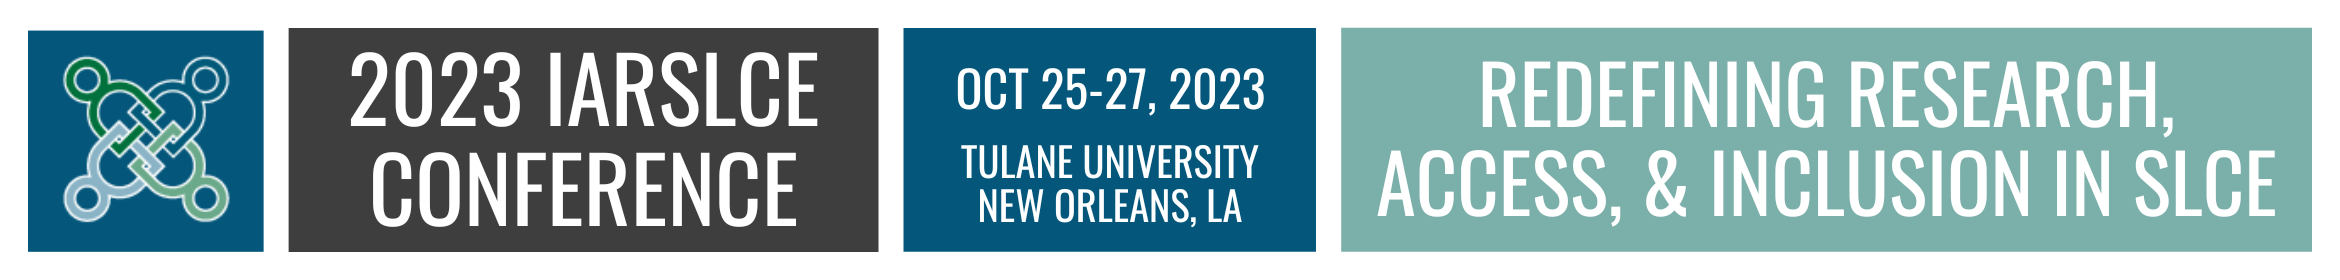 2023 IARSLCE Conference Main banner